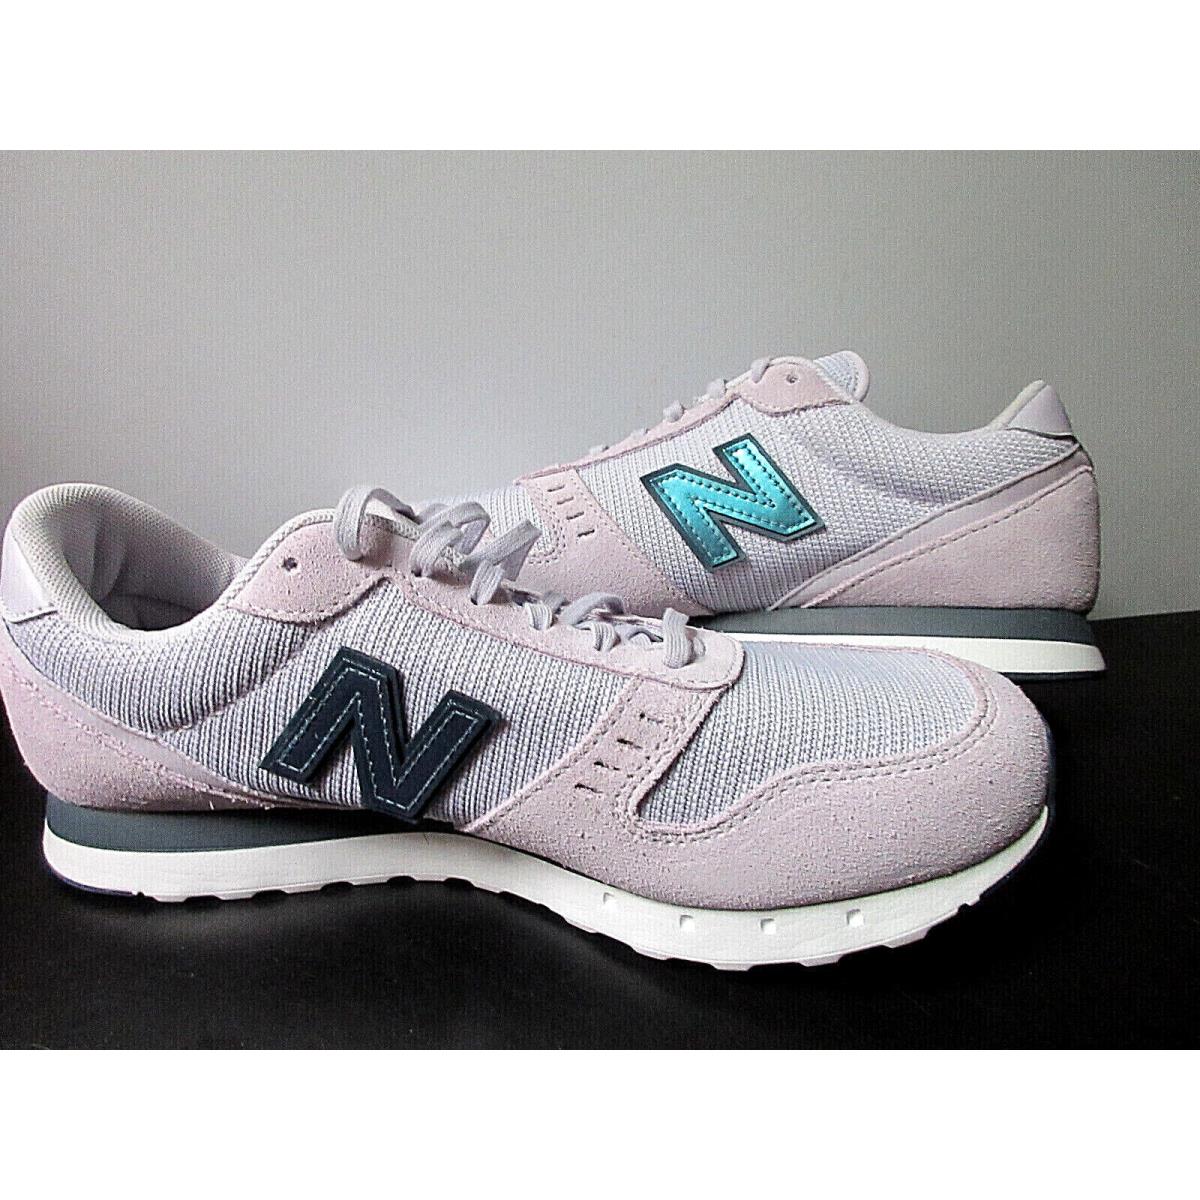 Woman`s New Balance Shoes WL311RB2 Lifestyle Sneakers Suede Lavender Size 10.5